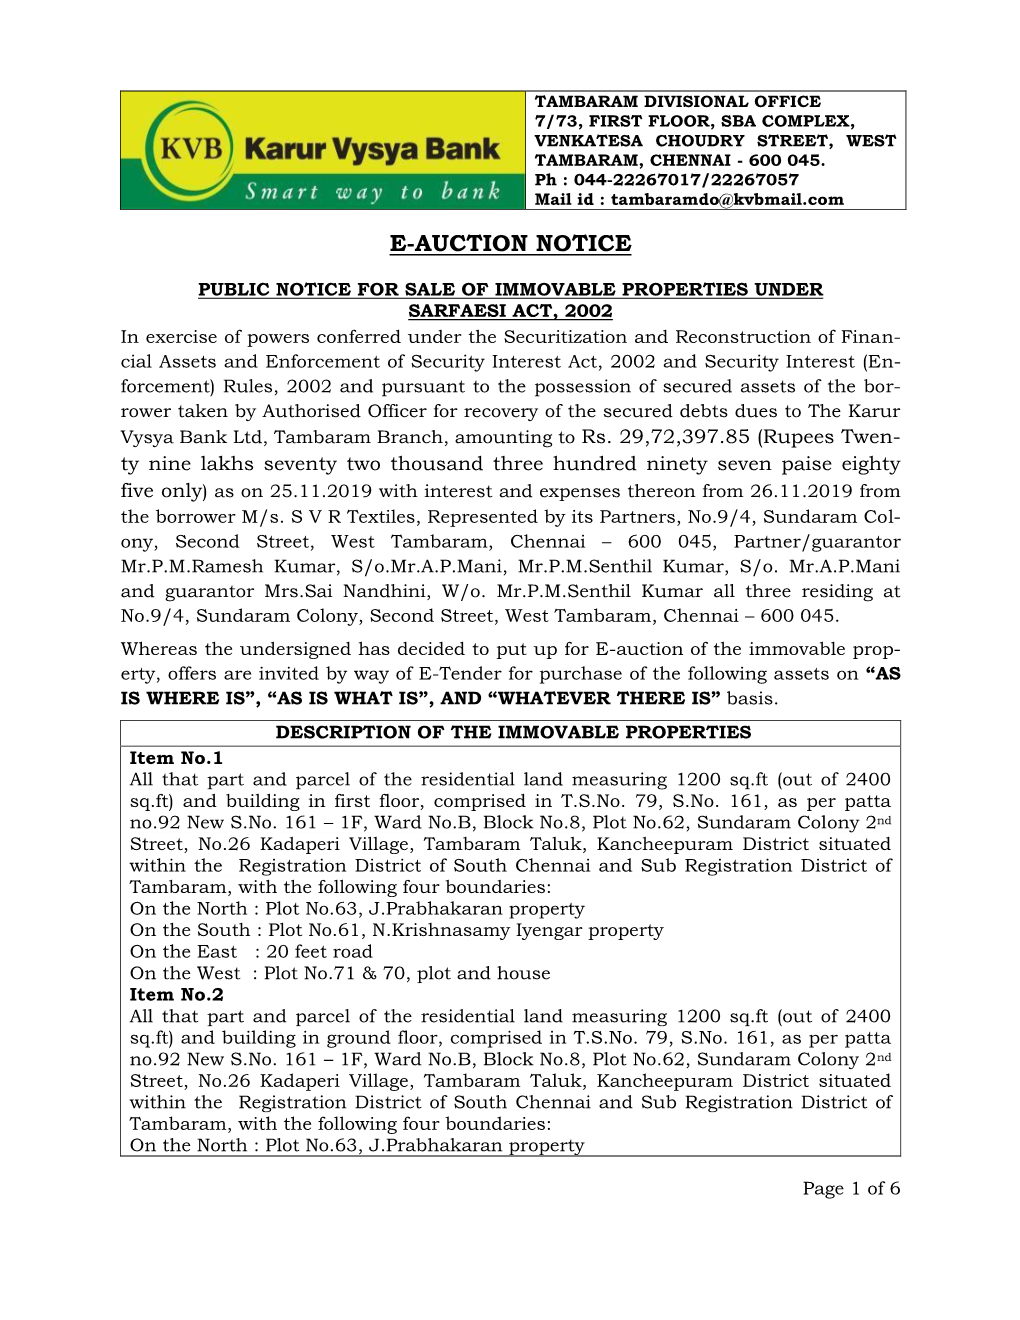 Sale of Residential Land and Building G+1 at Sundaram Colony Second Street